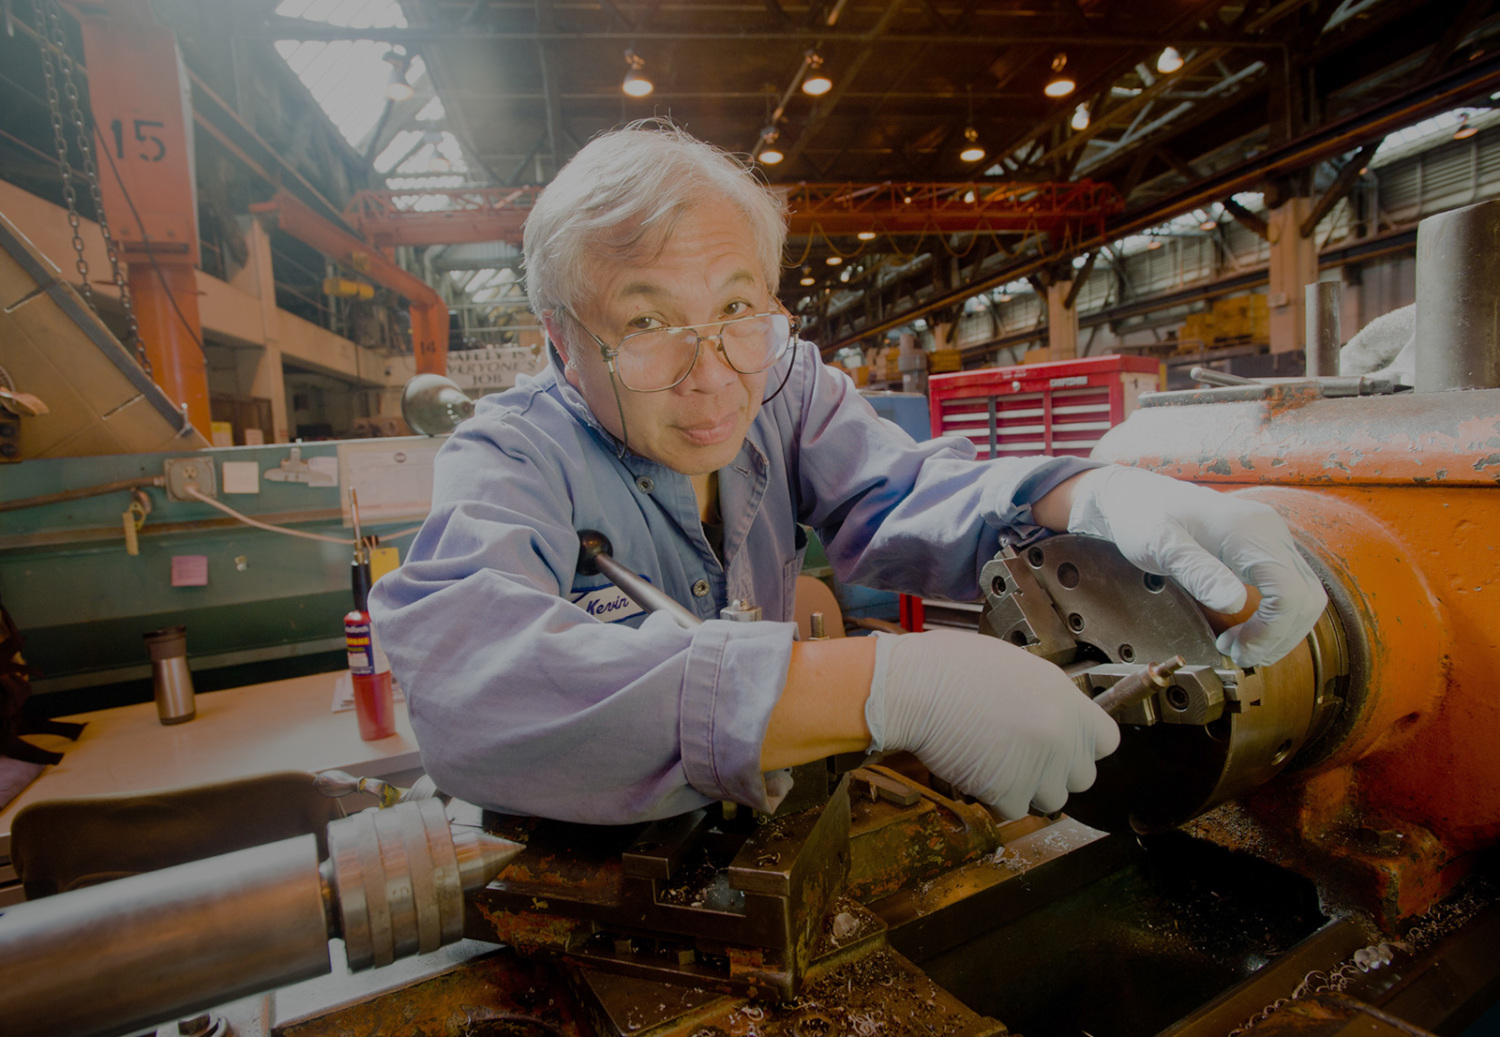 Image of union member at work from AFL-CIO website created by Teal Media